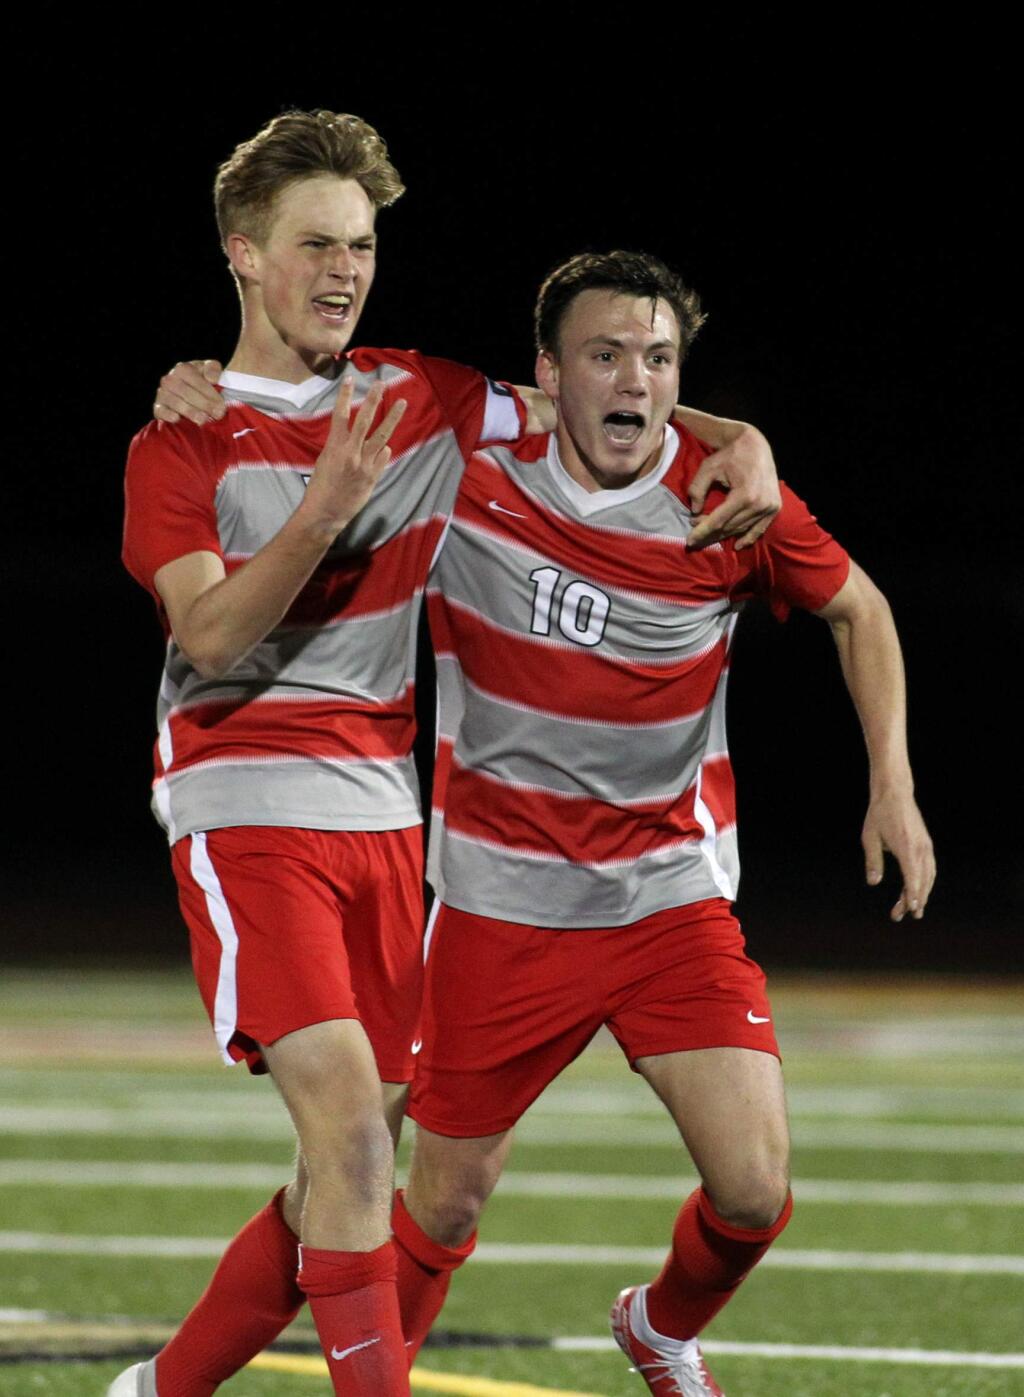 Montgomery’s Kevin Welch, left, and Zack Batchelder celebrate victory at the end of their NCS soccer championship contest against Berkeley in February. (Darryl Bush / For The Press Democrat)